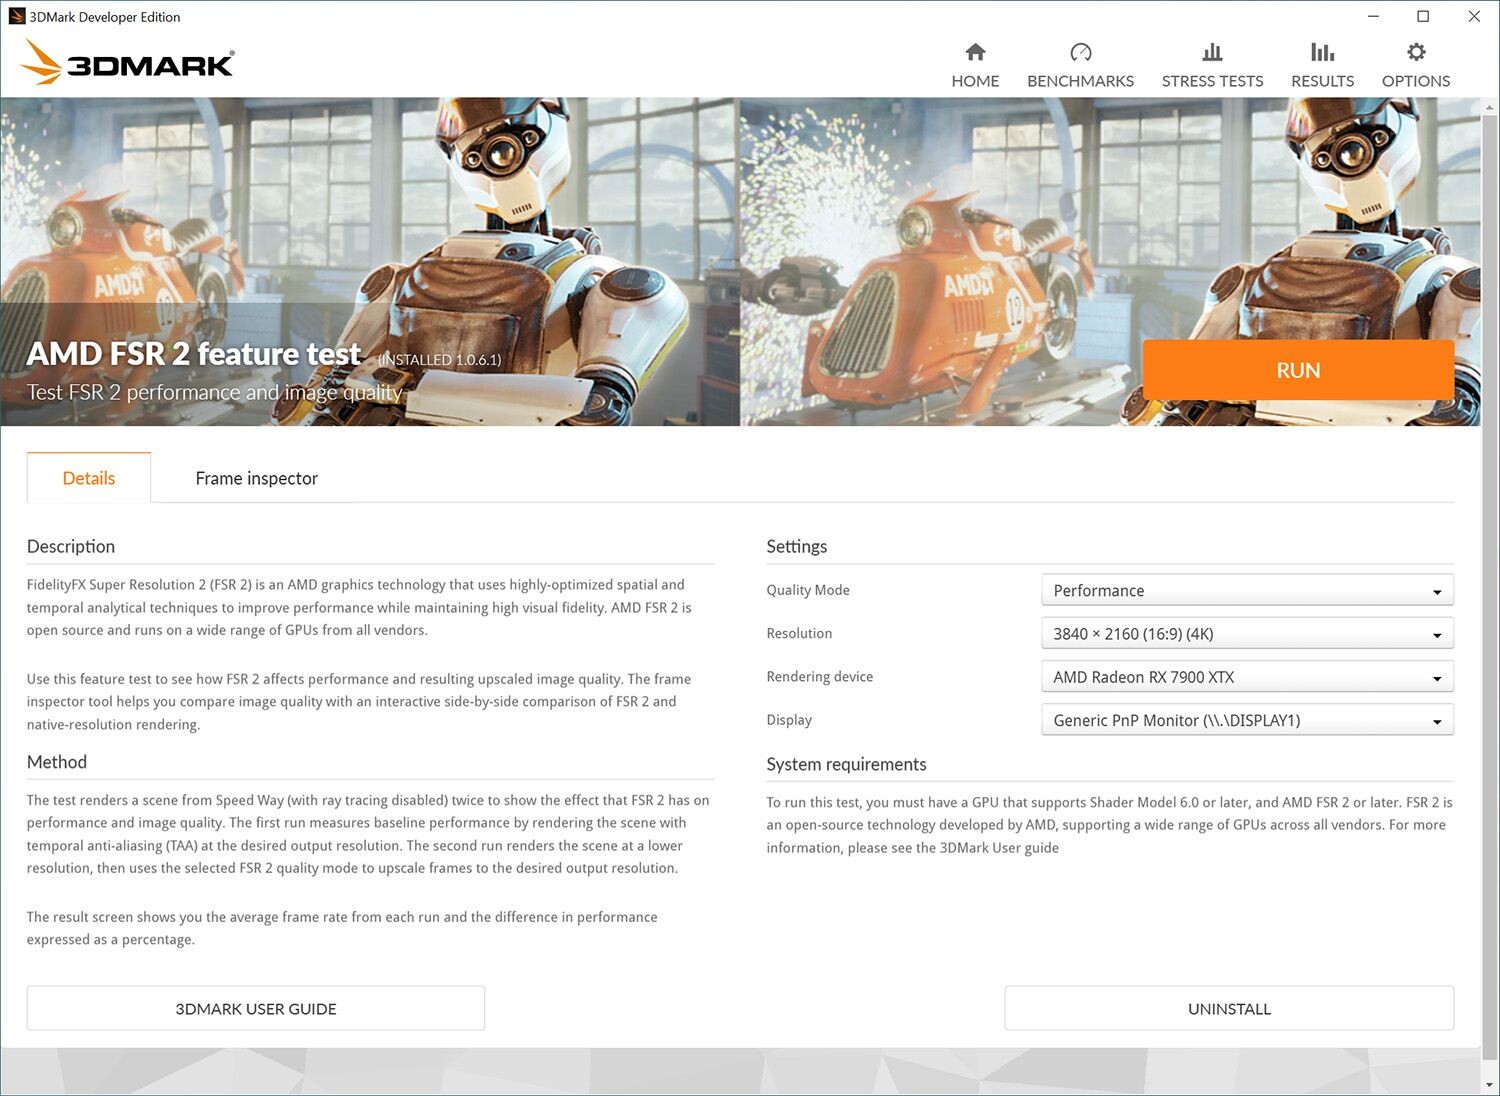 UL Benchmarks releases the new 3DMark Speed Way DirectX 12